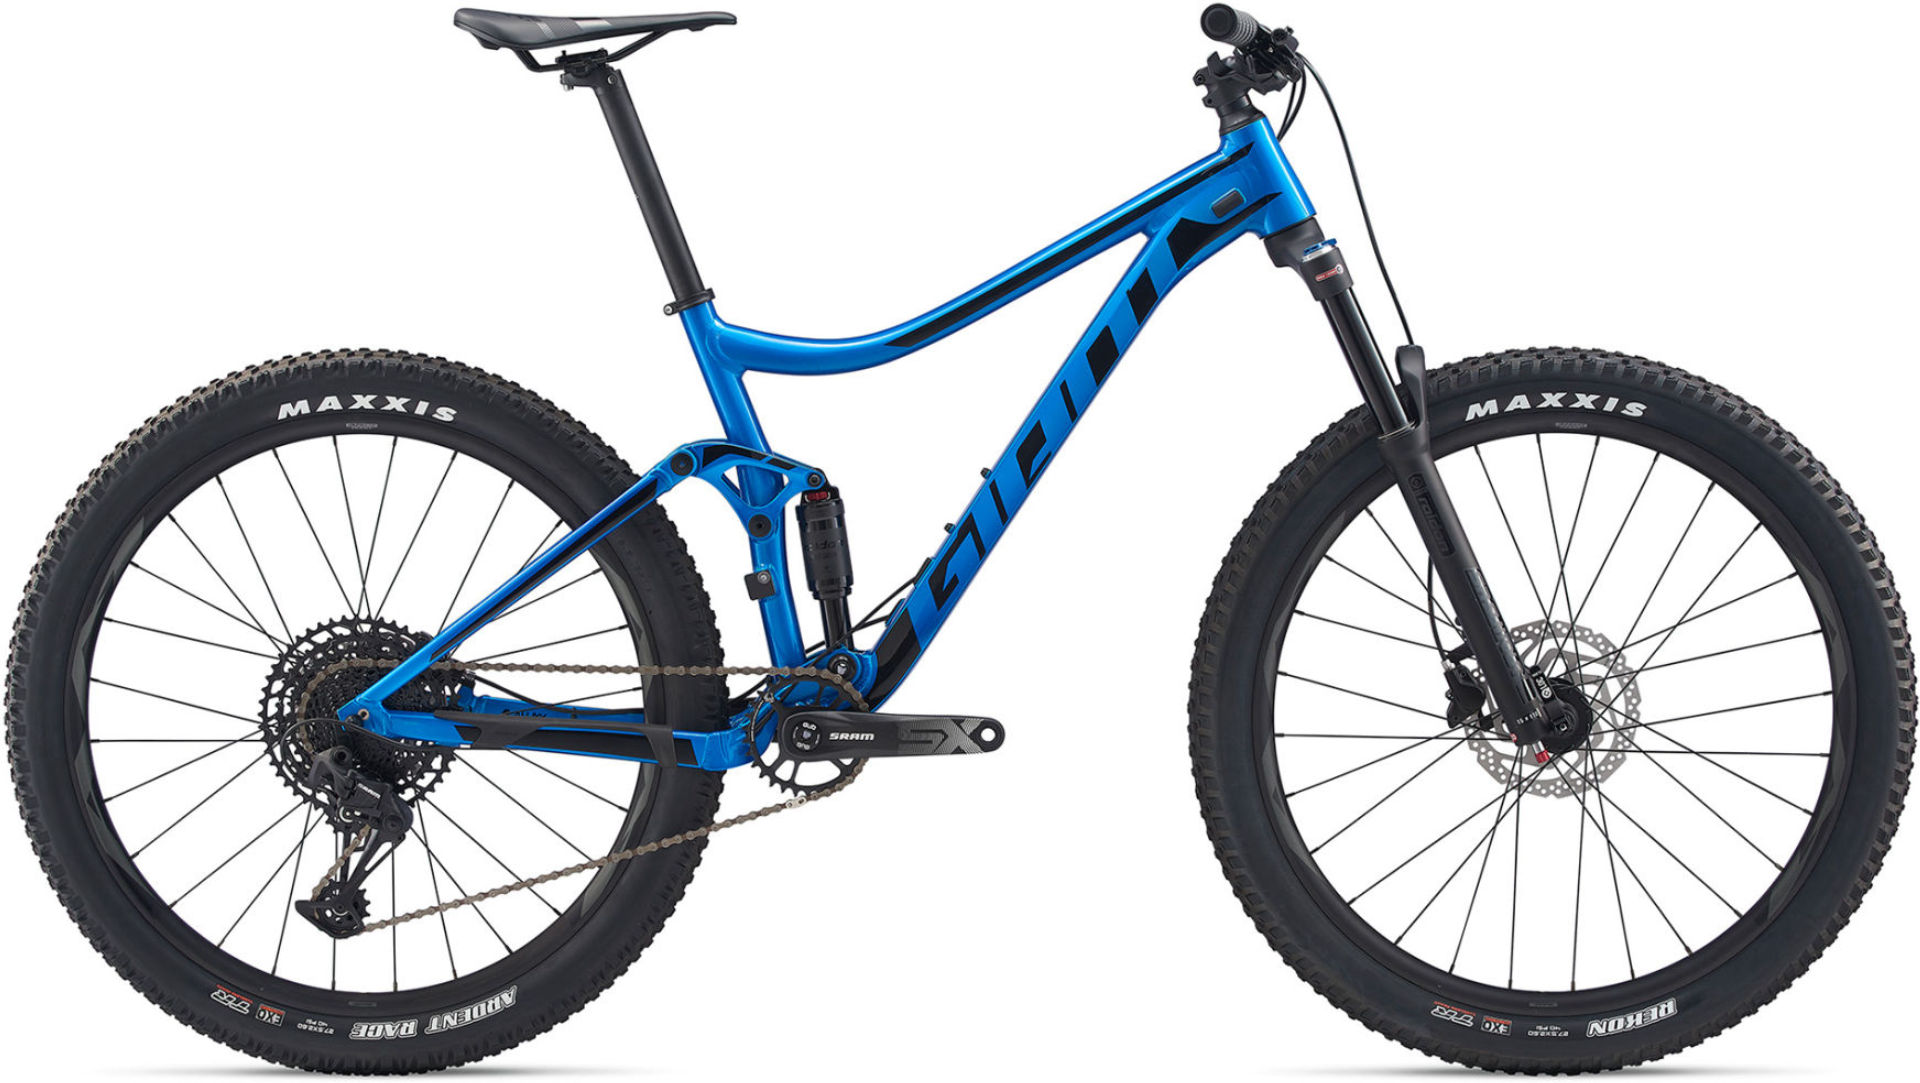  Giant  Stance  Stance  2 2022 Cross country XC bike 